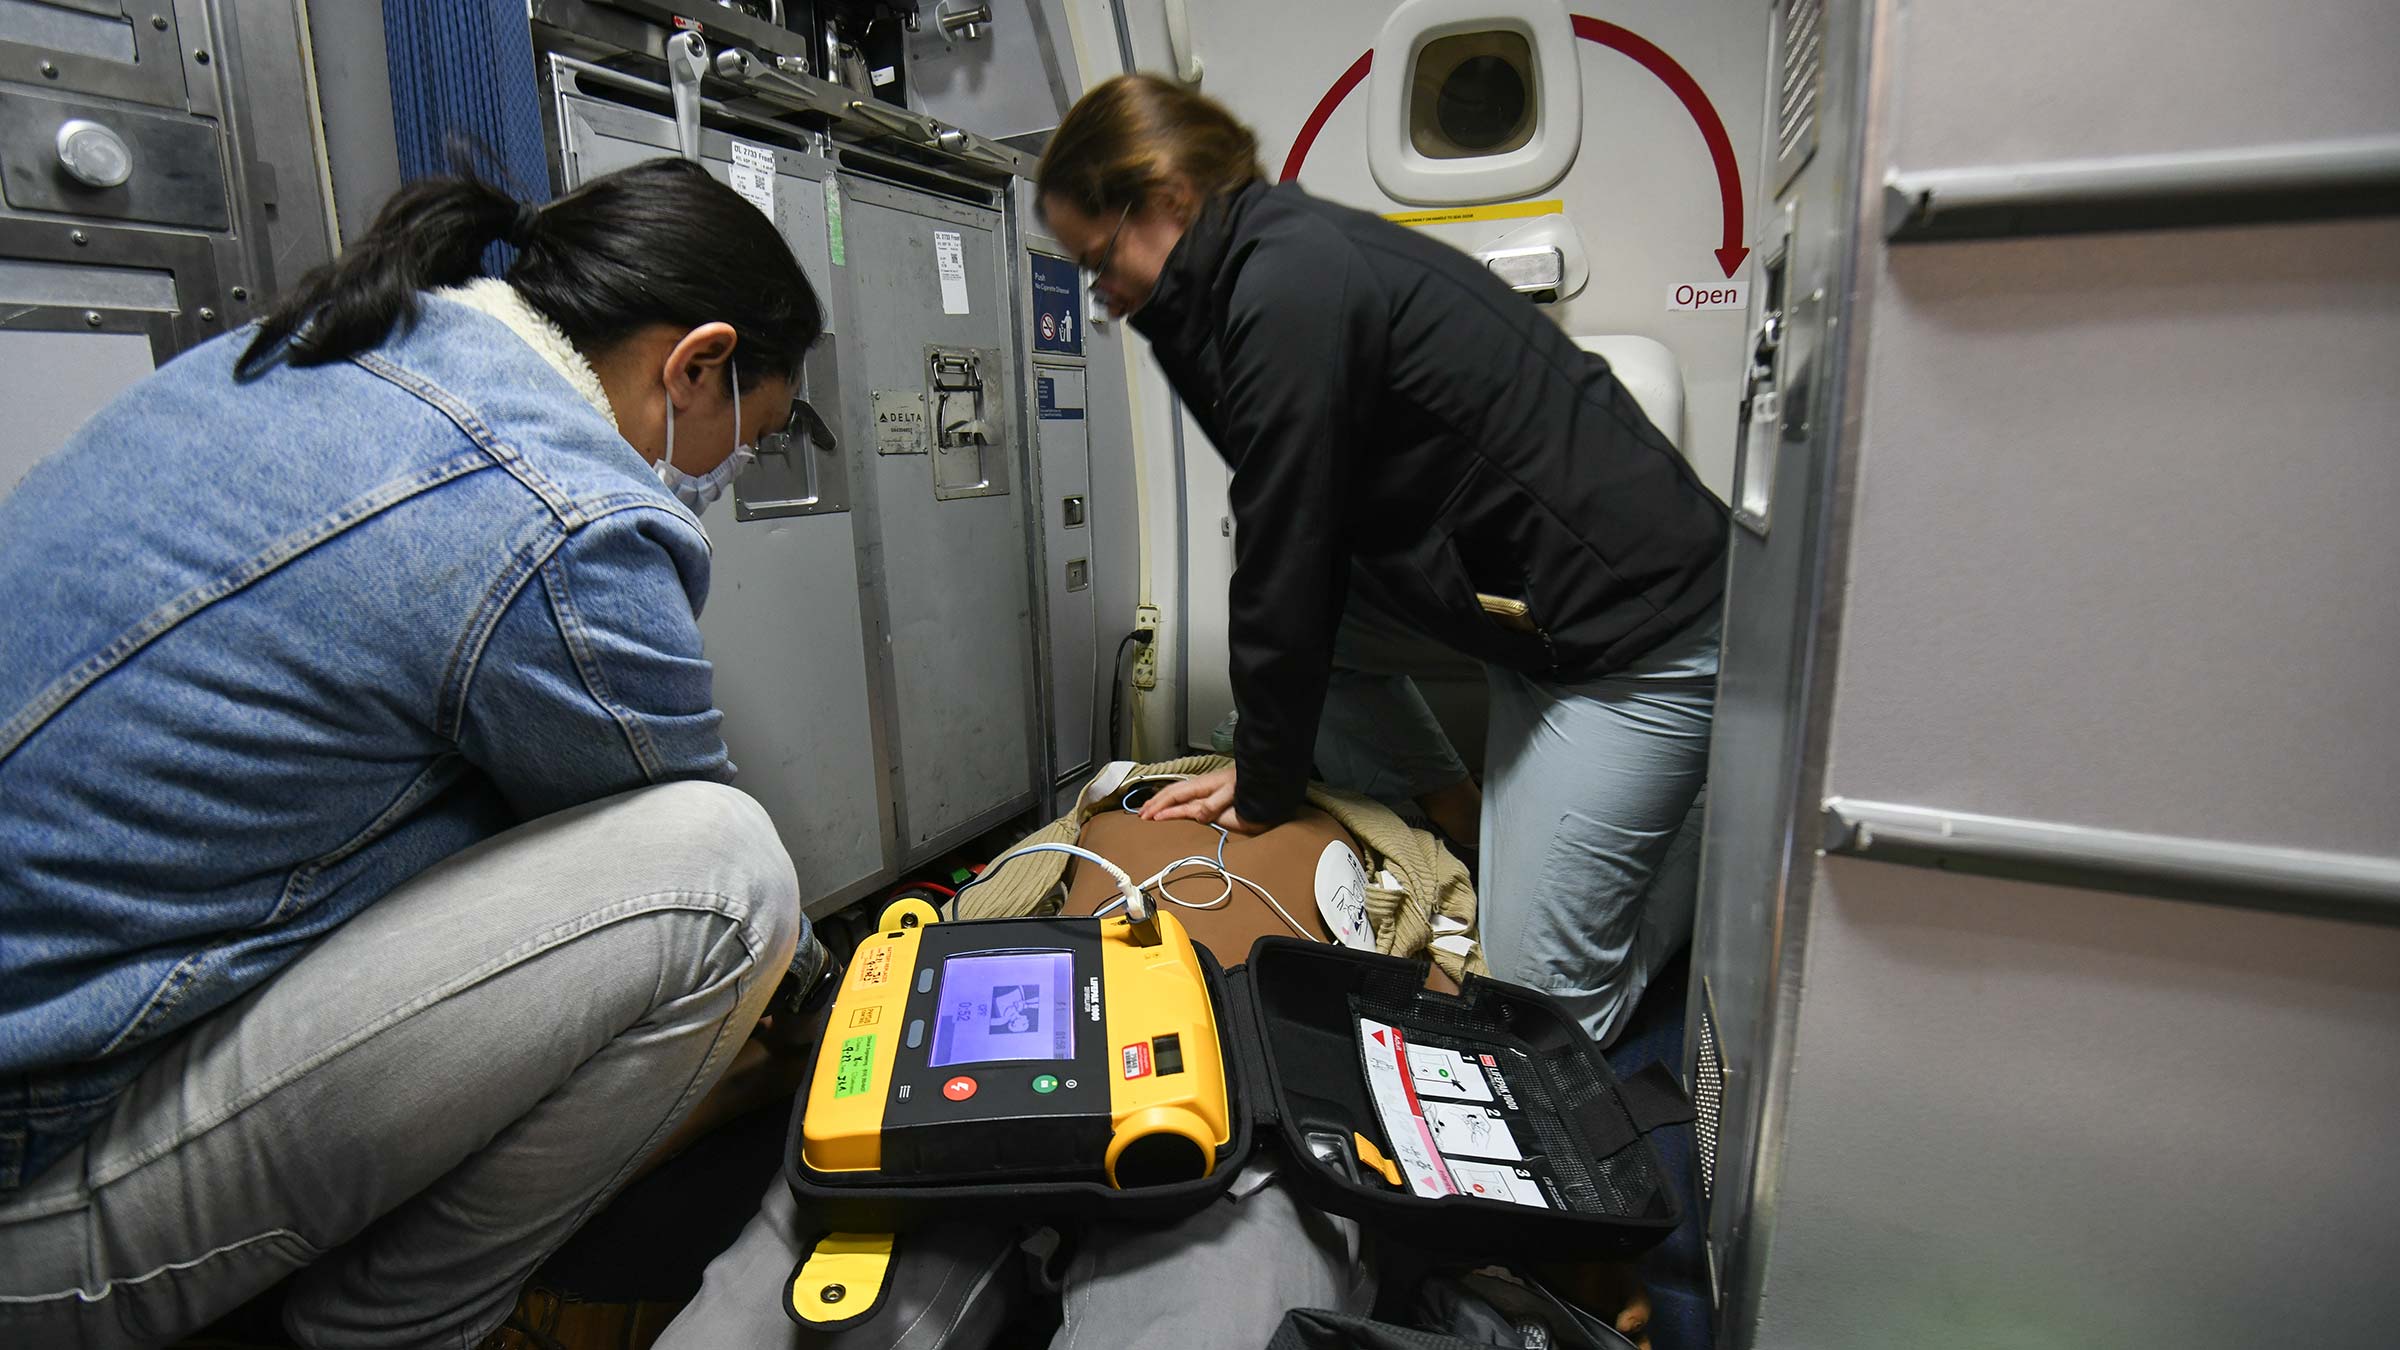 Game-changing tools train emergency medicine students and residents to respond to real-life disasters